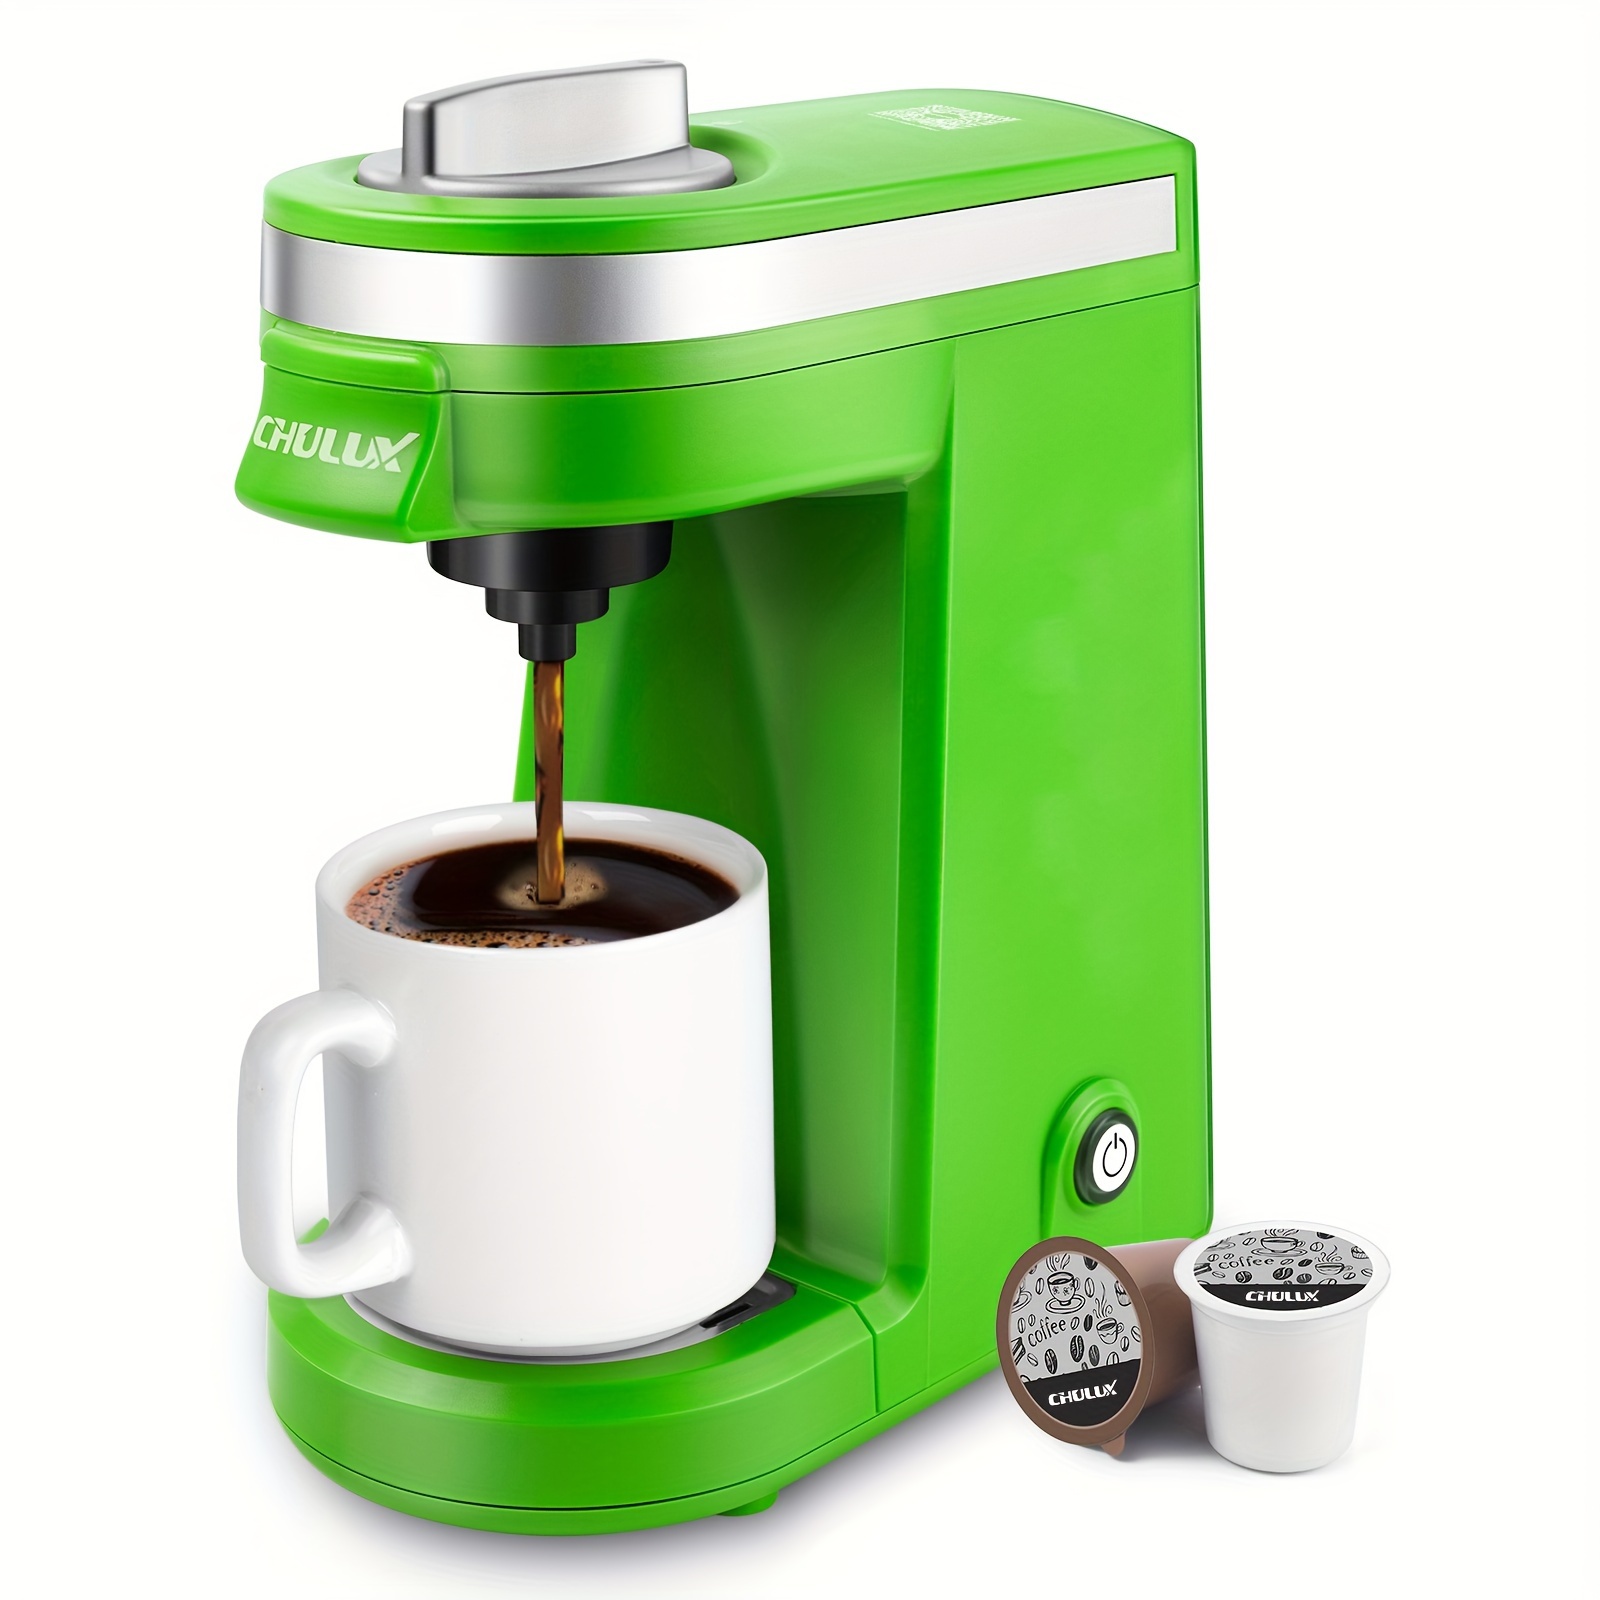 

1pc, Chulux Single Cup Coffee Maker, Suitable For K-cup Coffee Capsules, Tea Capsules And Ground Coffee, 12 Ounce Built-in Water Tank, Green